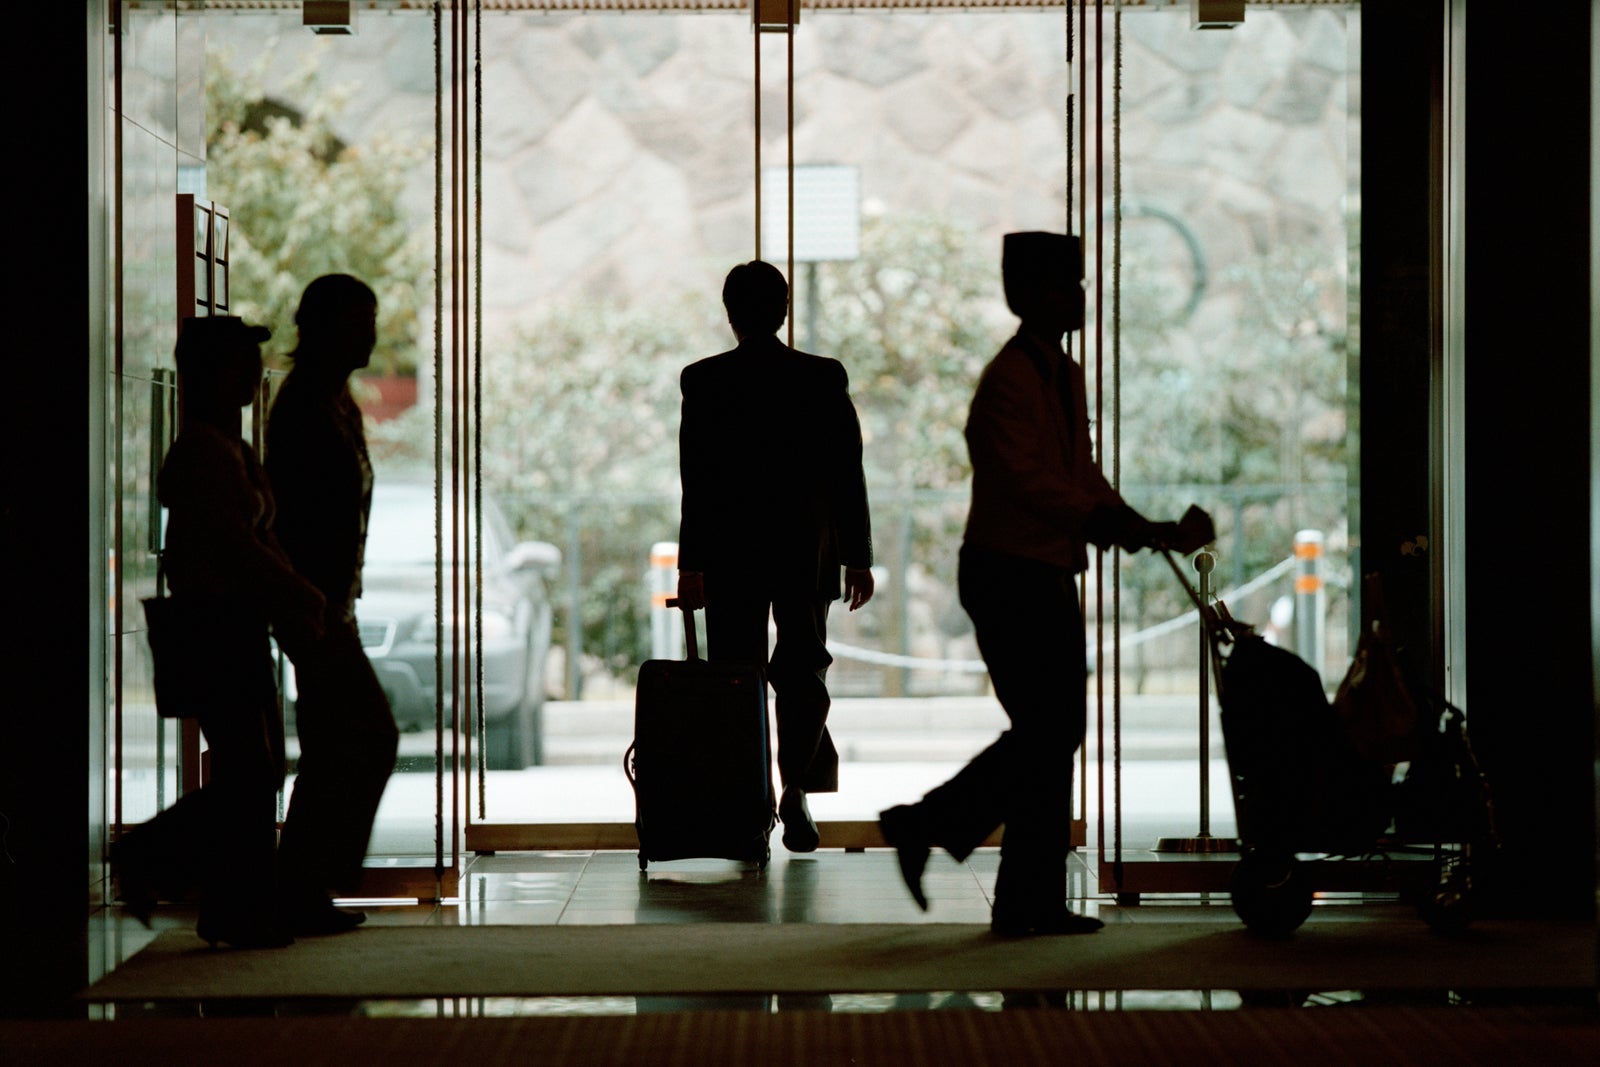 People carrying luggage in lobby, silhouette